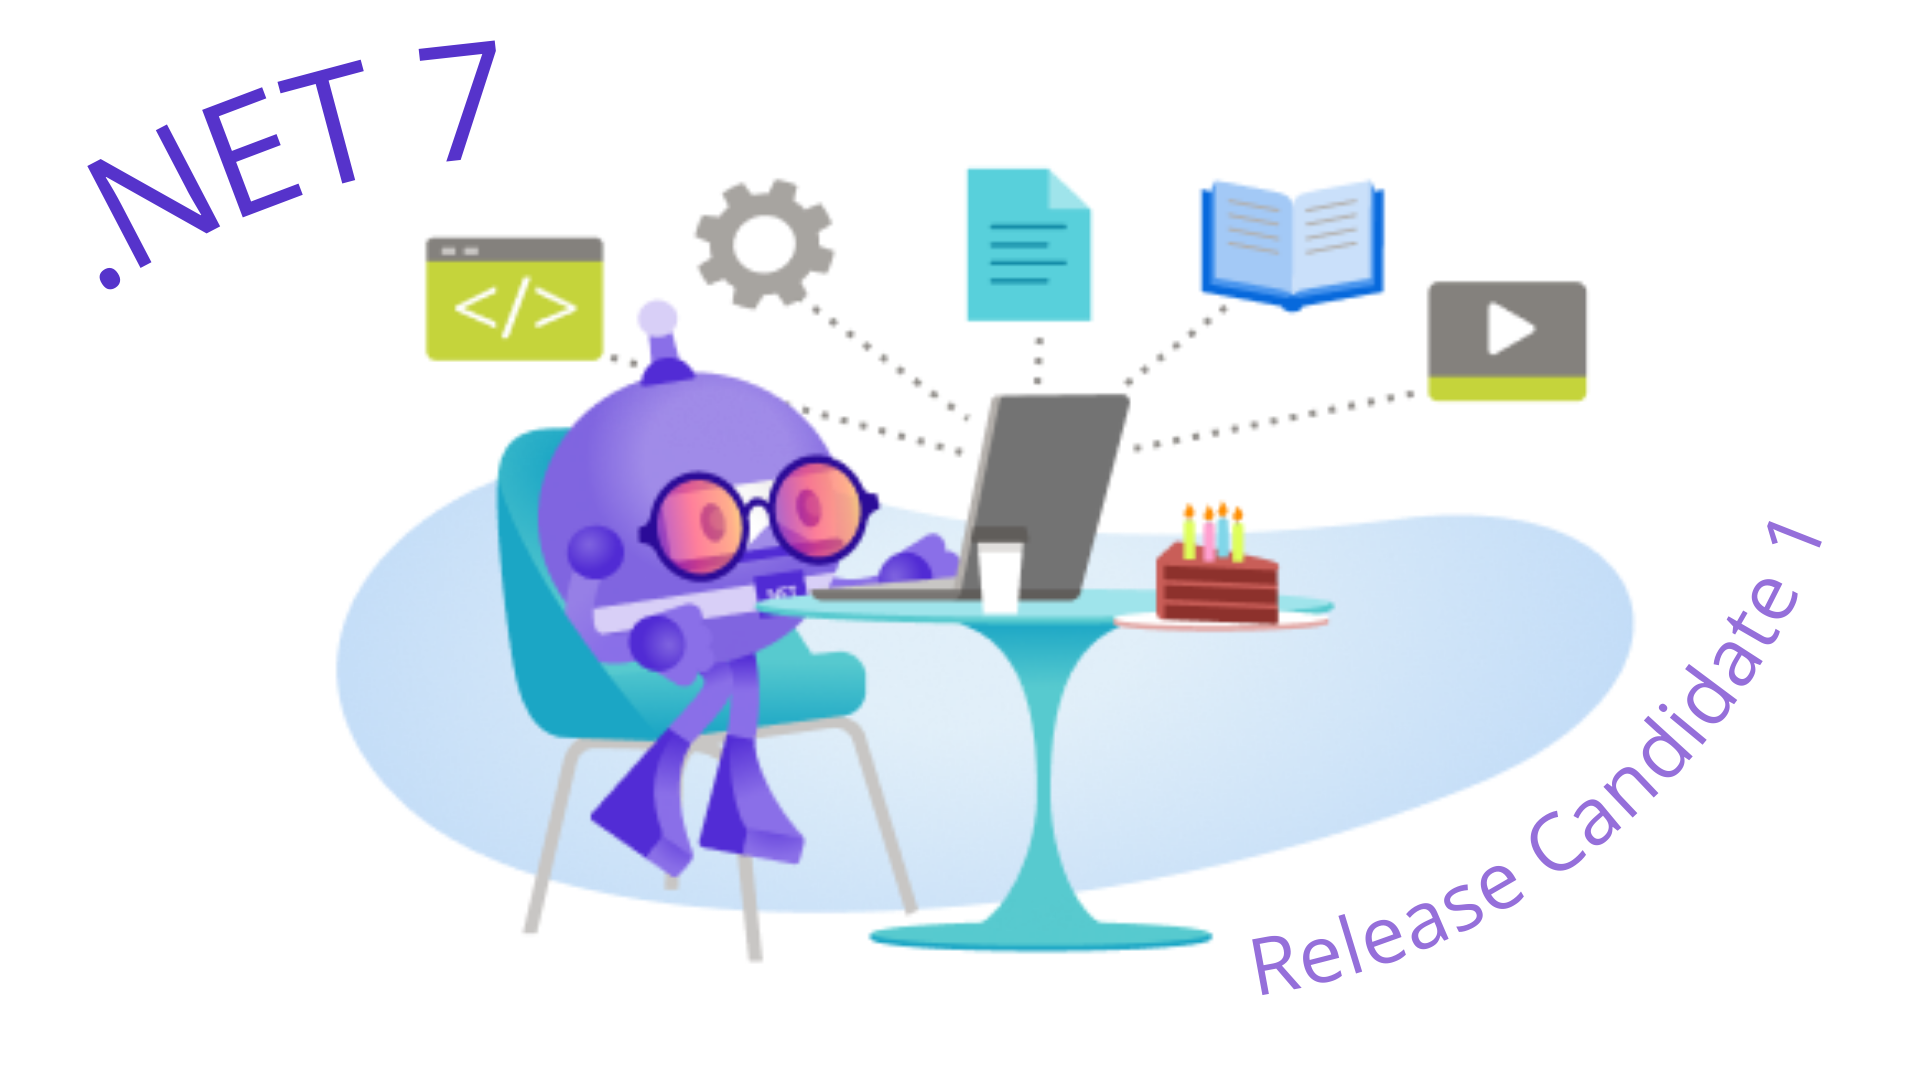 .NET 7 Release Candidate 1 is the first of two release candidates that developers can now use in production. This post recaps major features included in the fastest .NET version to date.